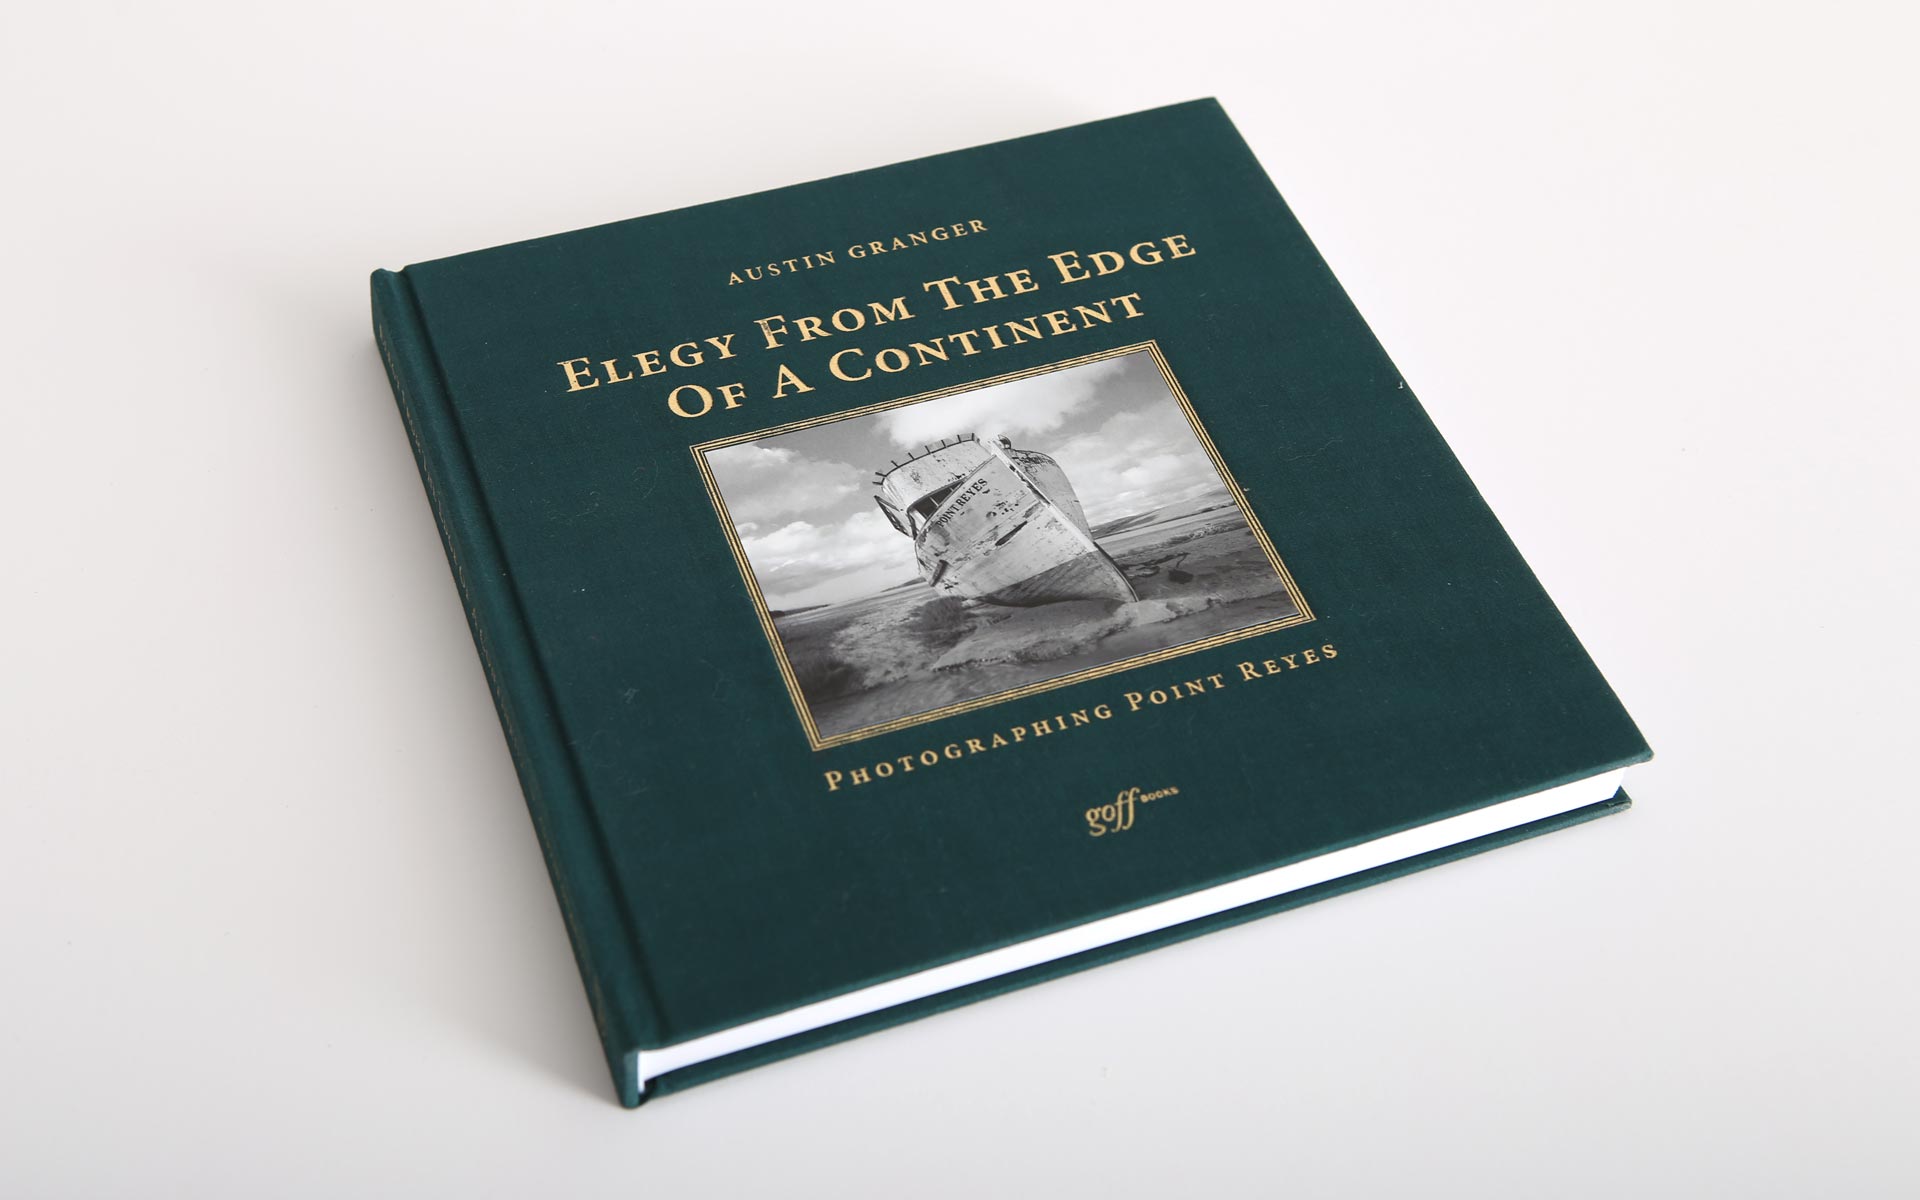 Elegy at the Edge of a Continent, by Austin Granger. Photography book design.